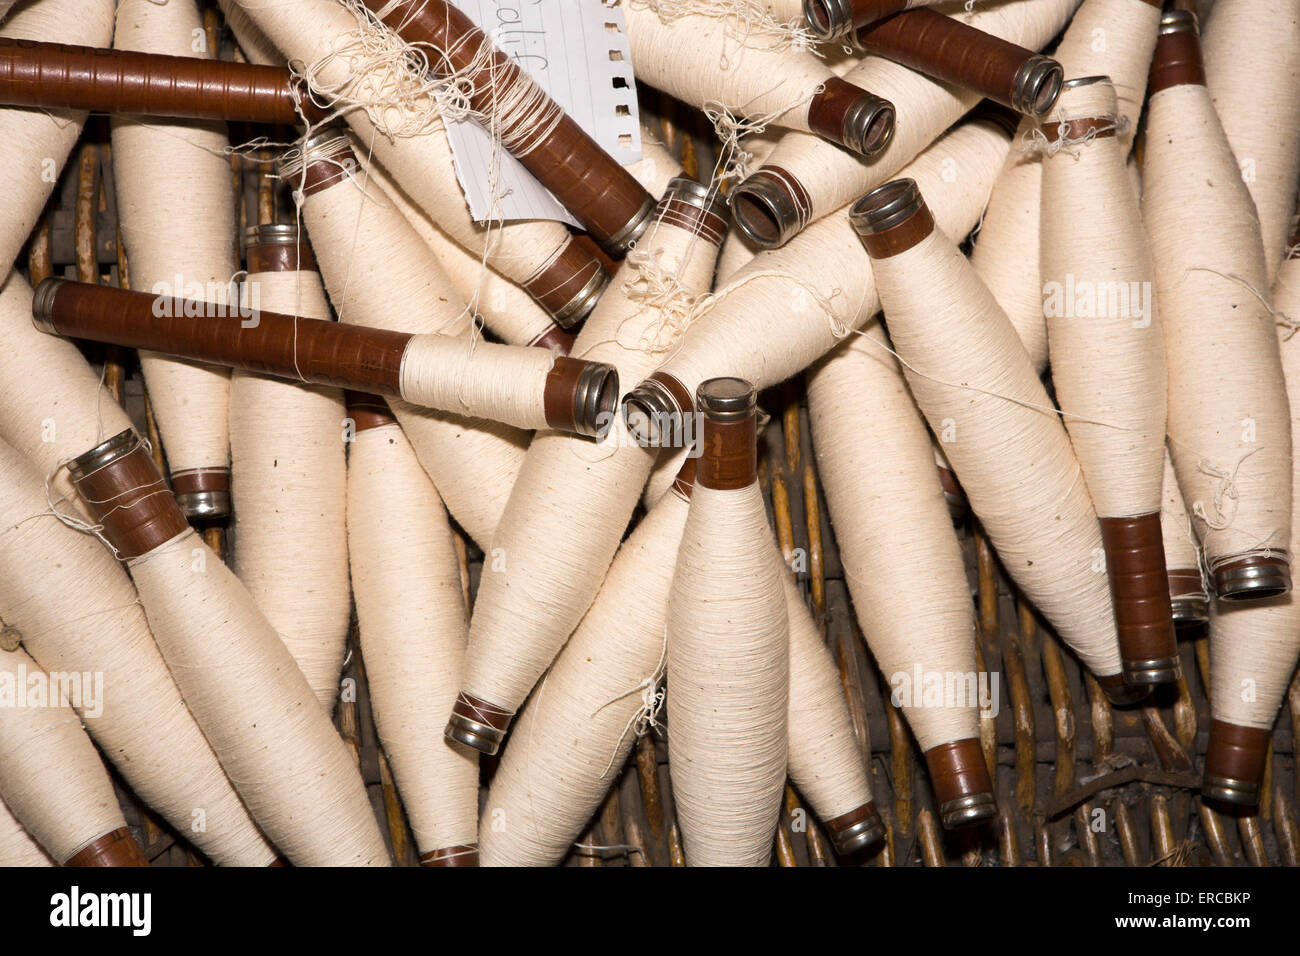 UK, England, Cheshire, Styal, Quarry Bank Mill, spindles of spun cotton Stock Photo